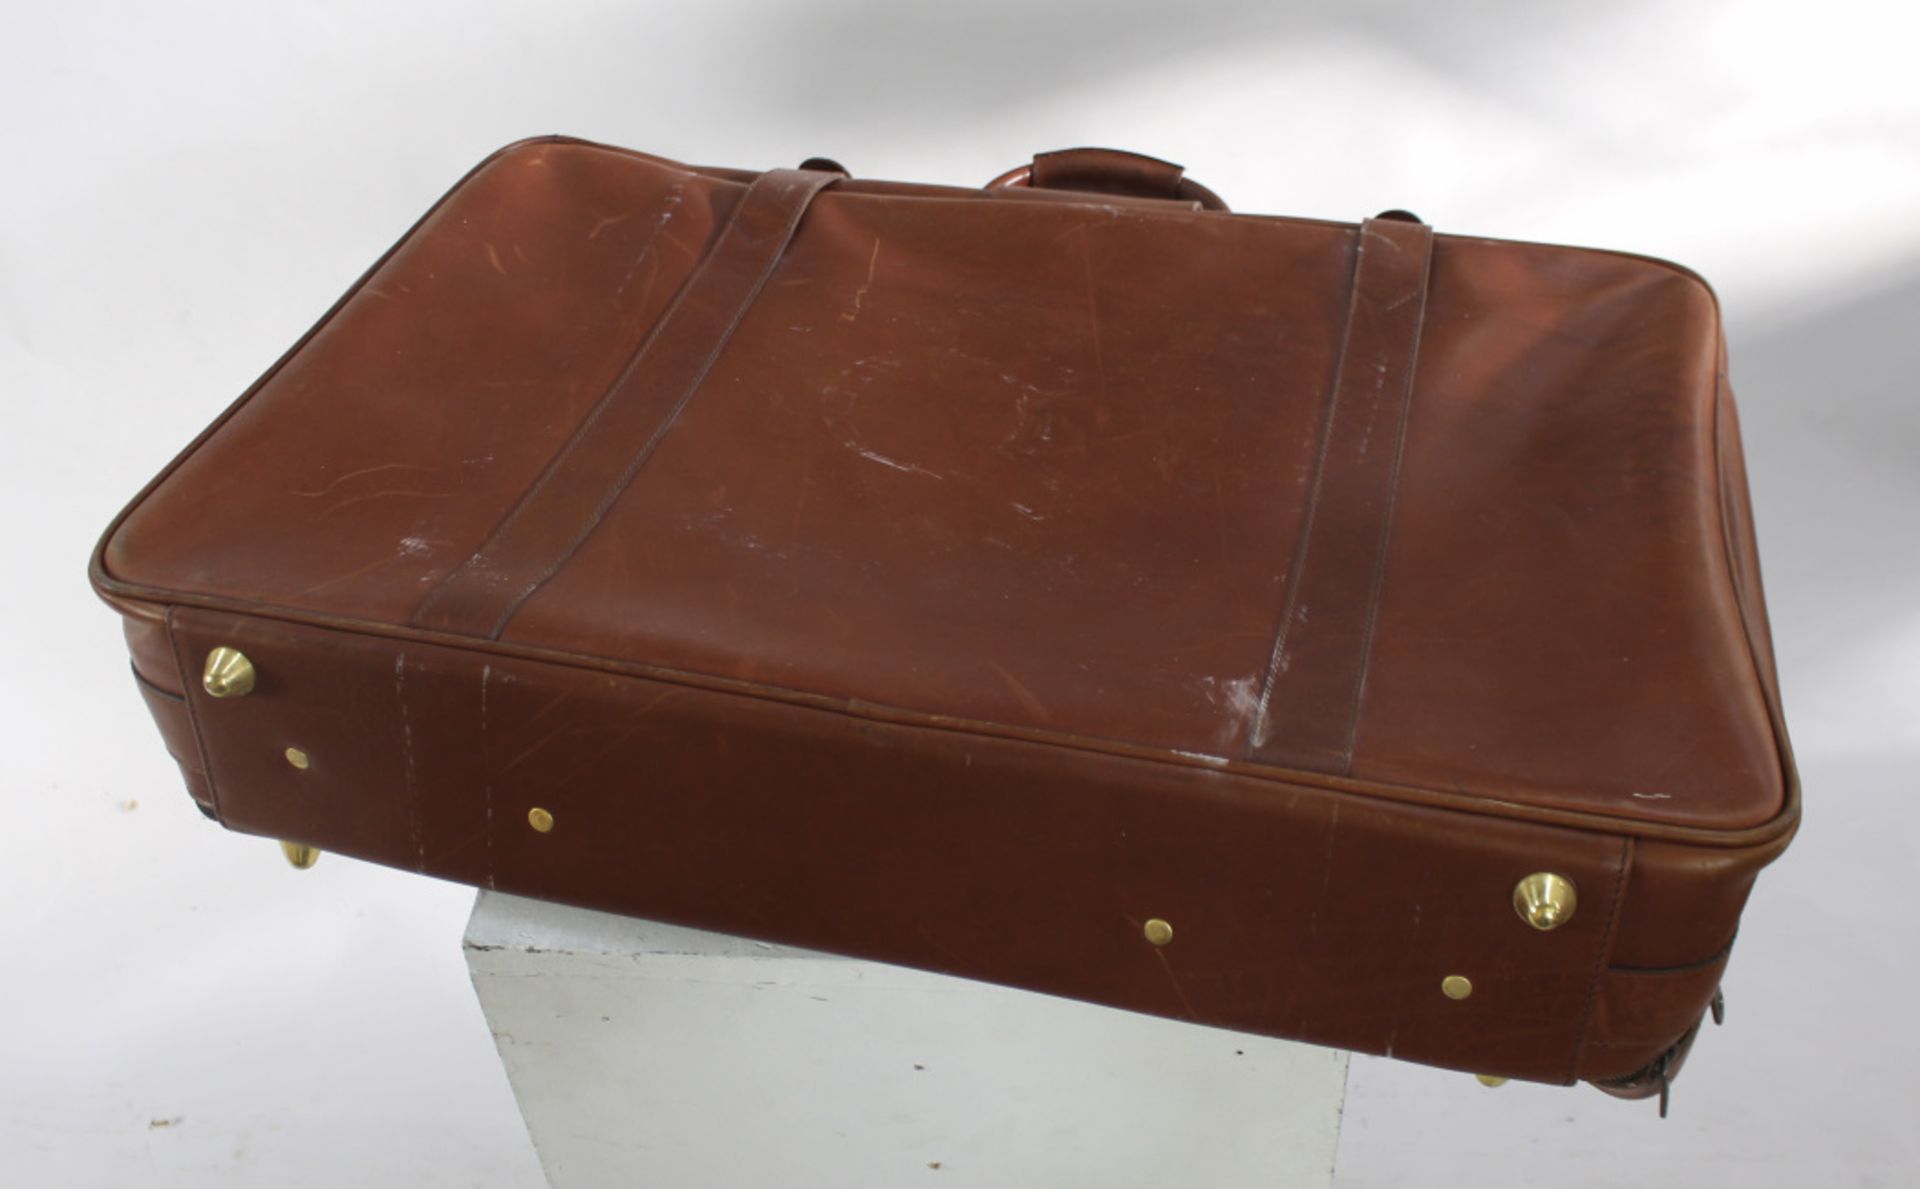 Allied Dunbar Tan Leather Luggage Case - Image 5 of 5